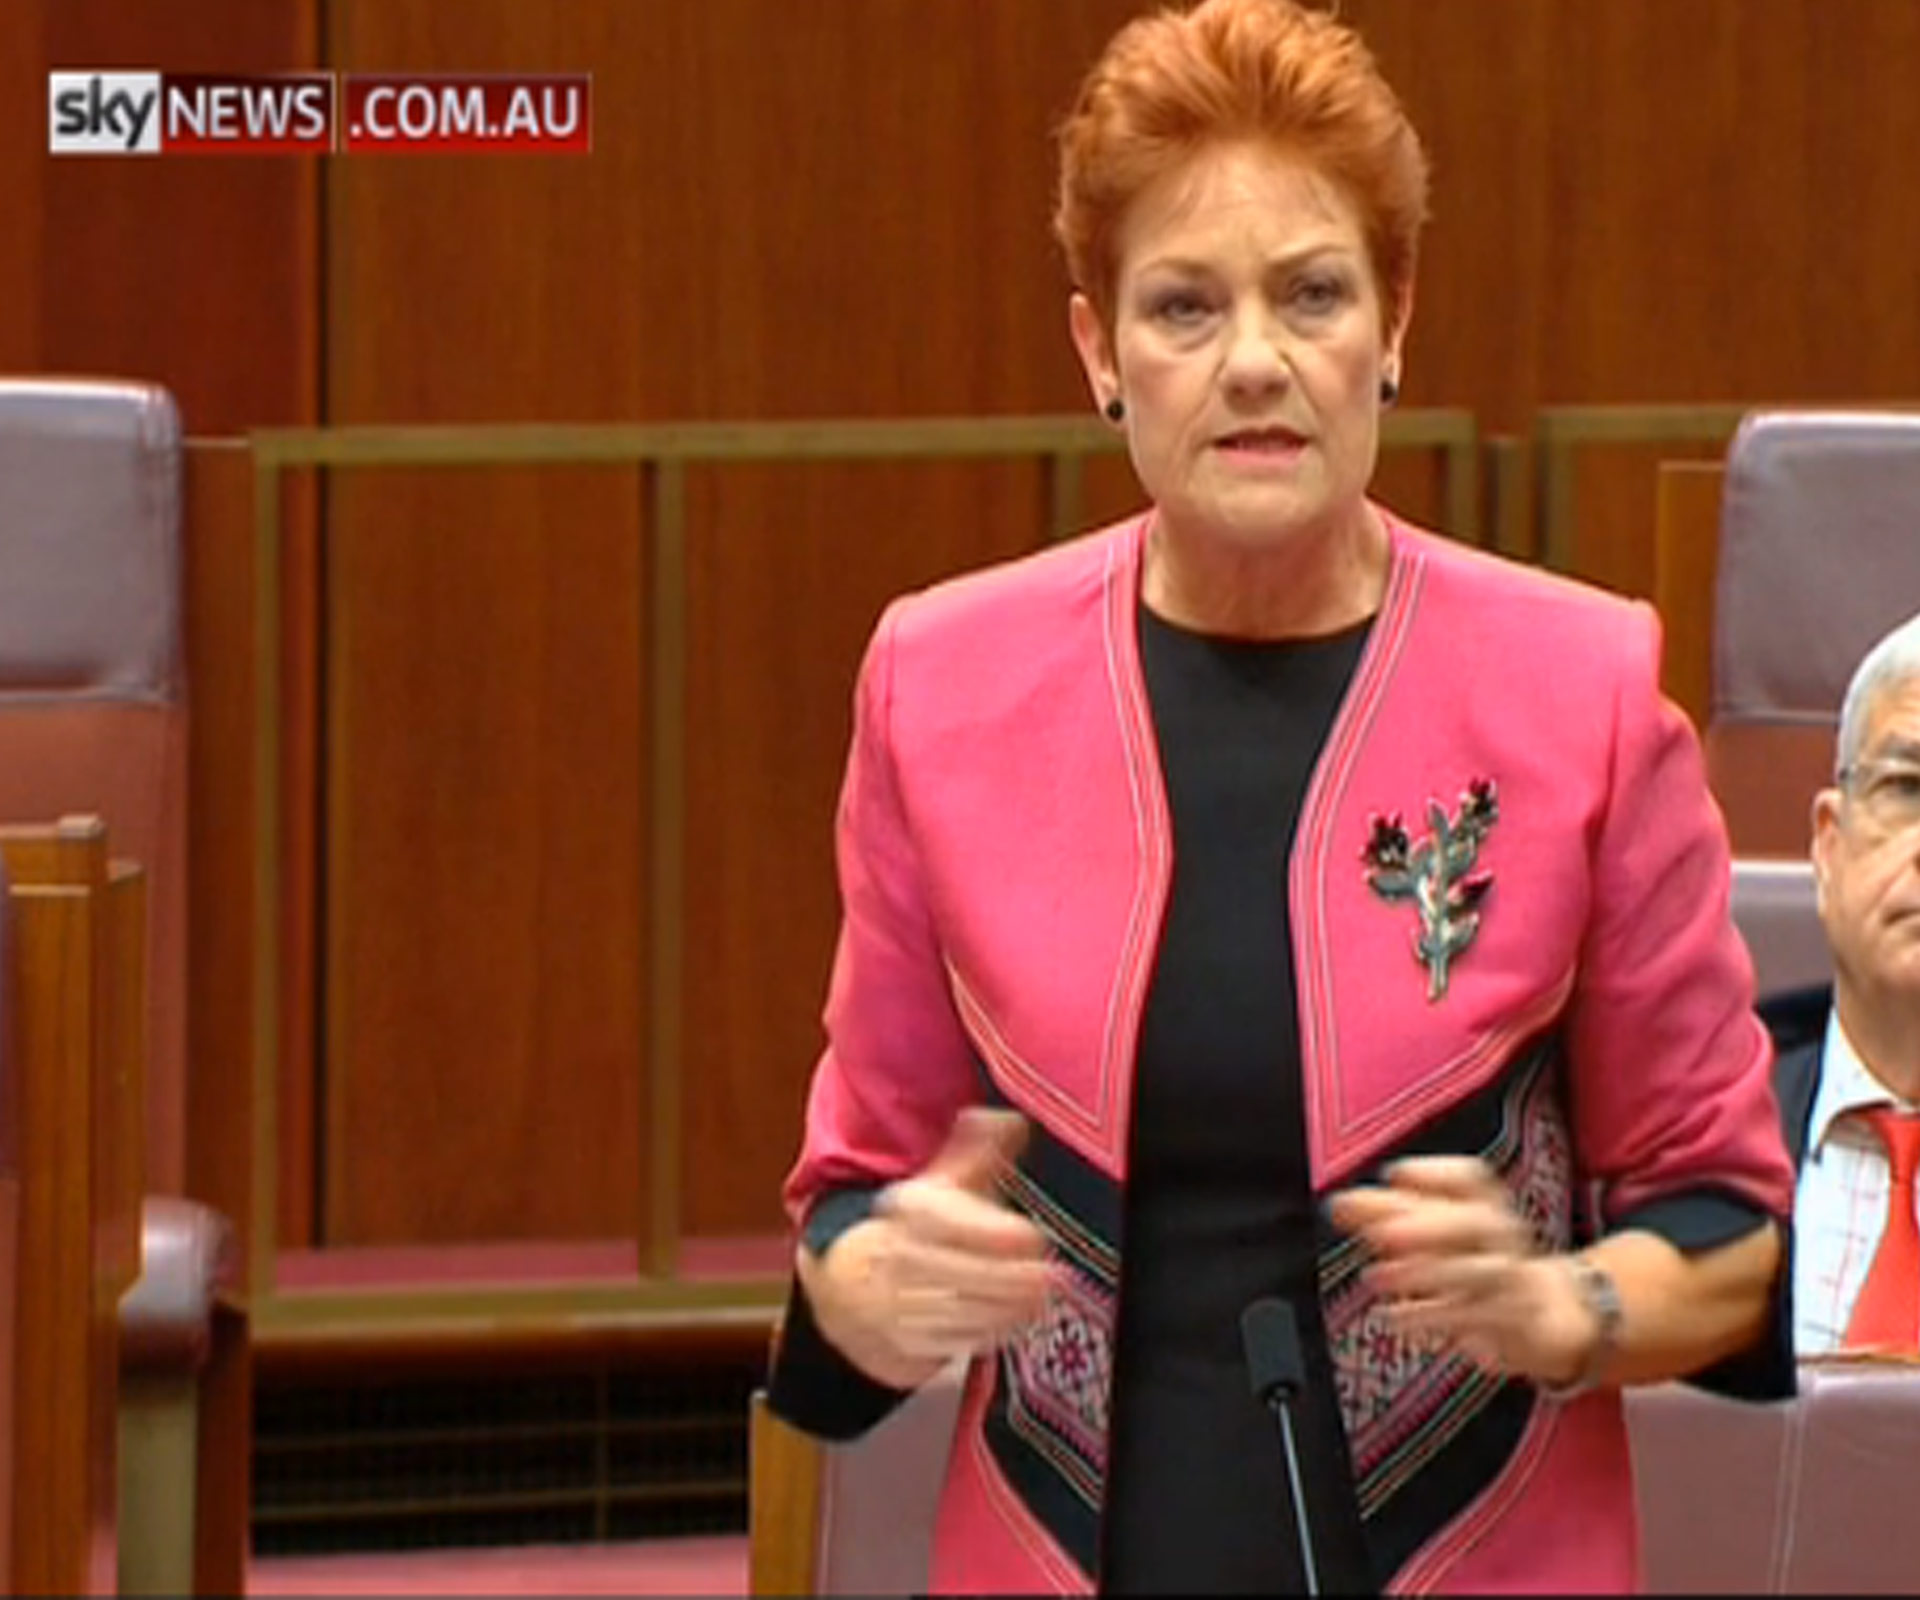 Pauline Hanson claims she’s a victim of “reverse racism”